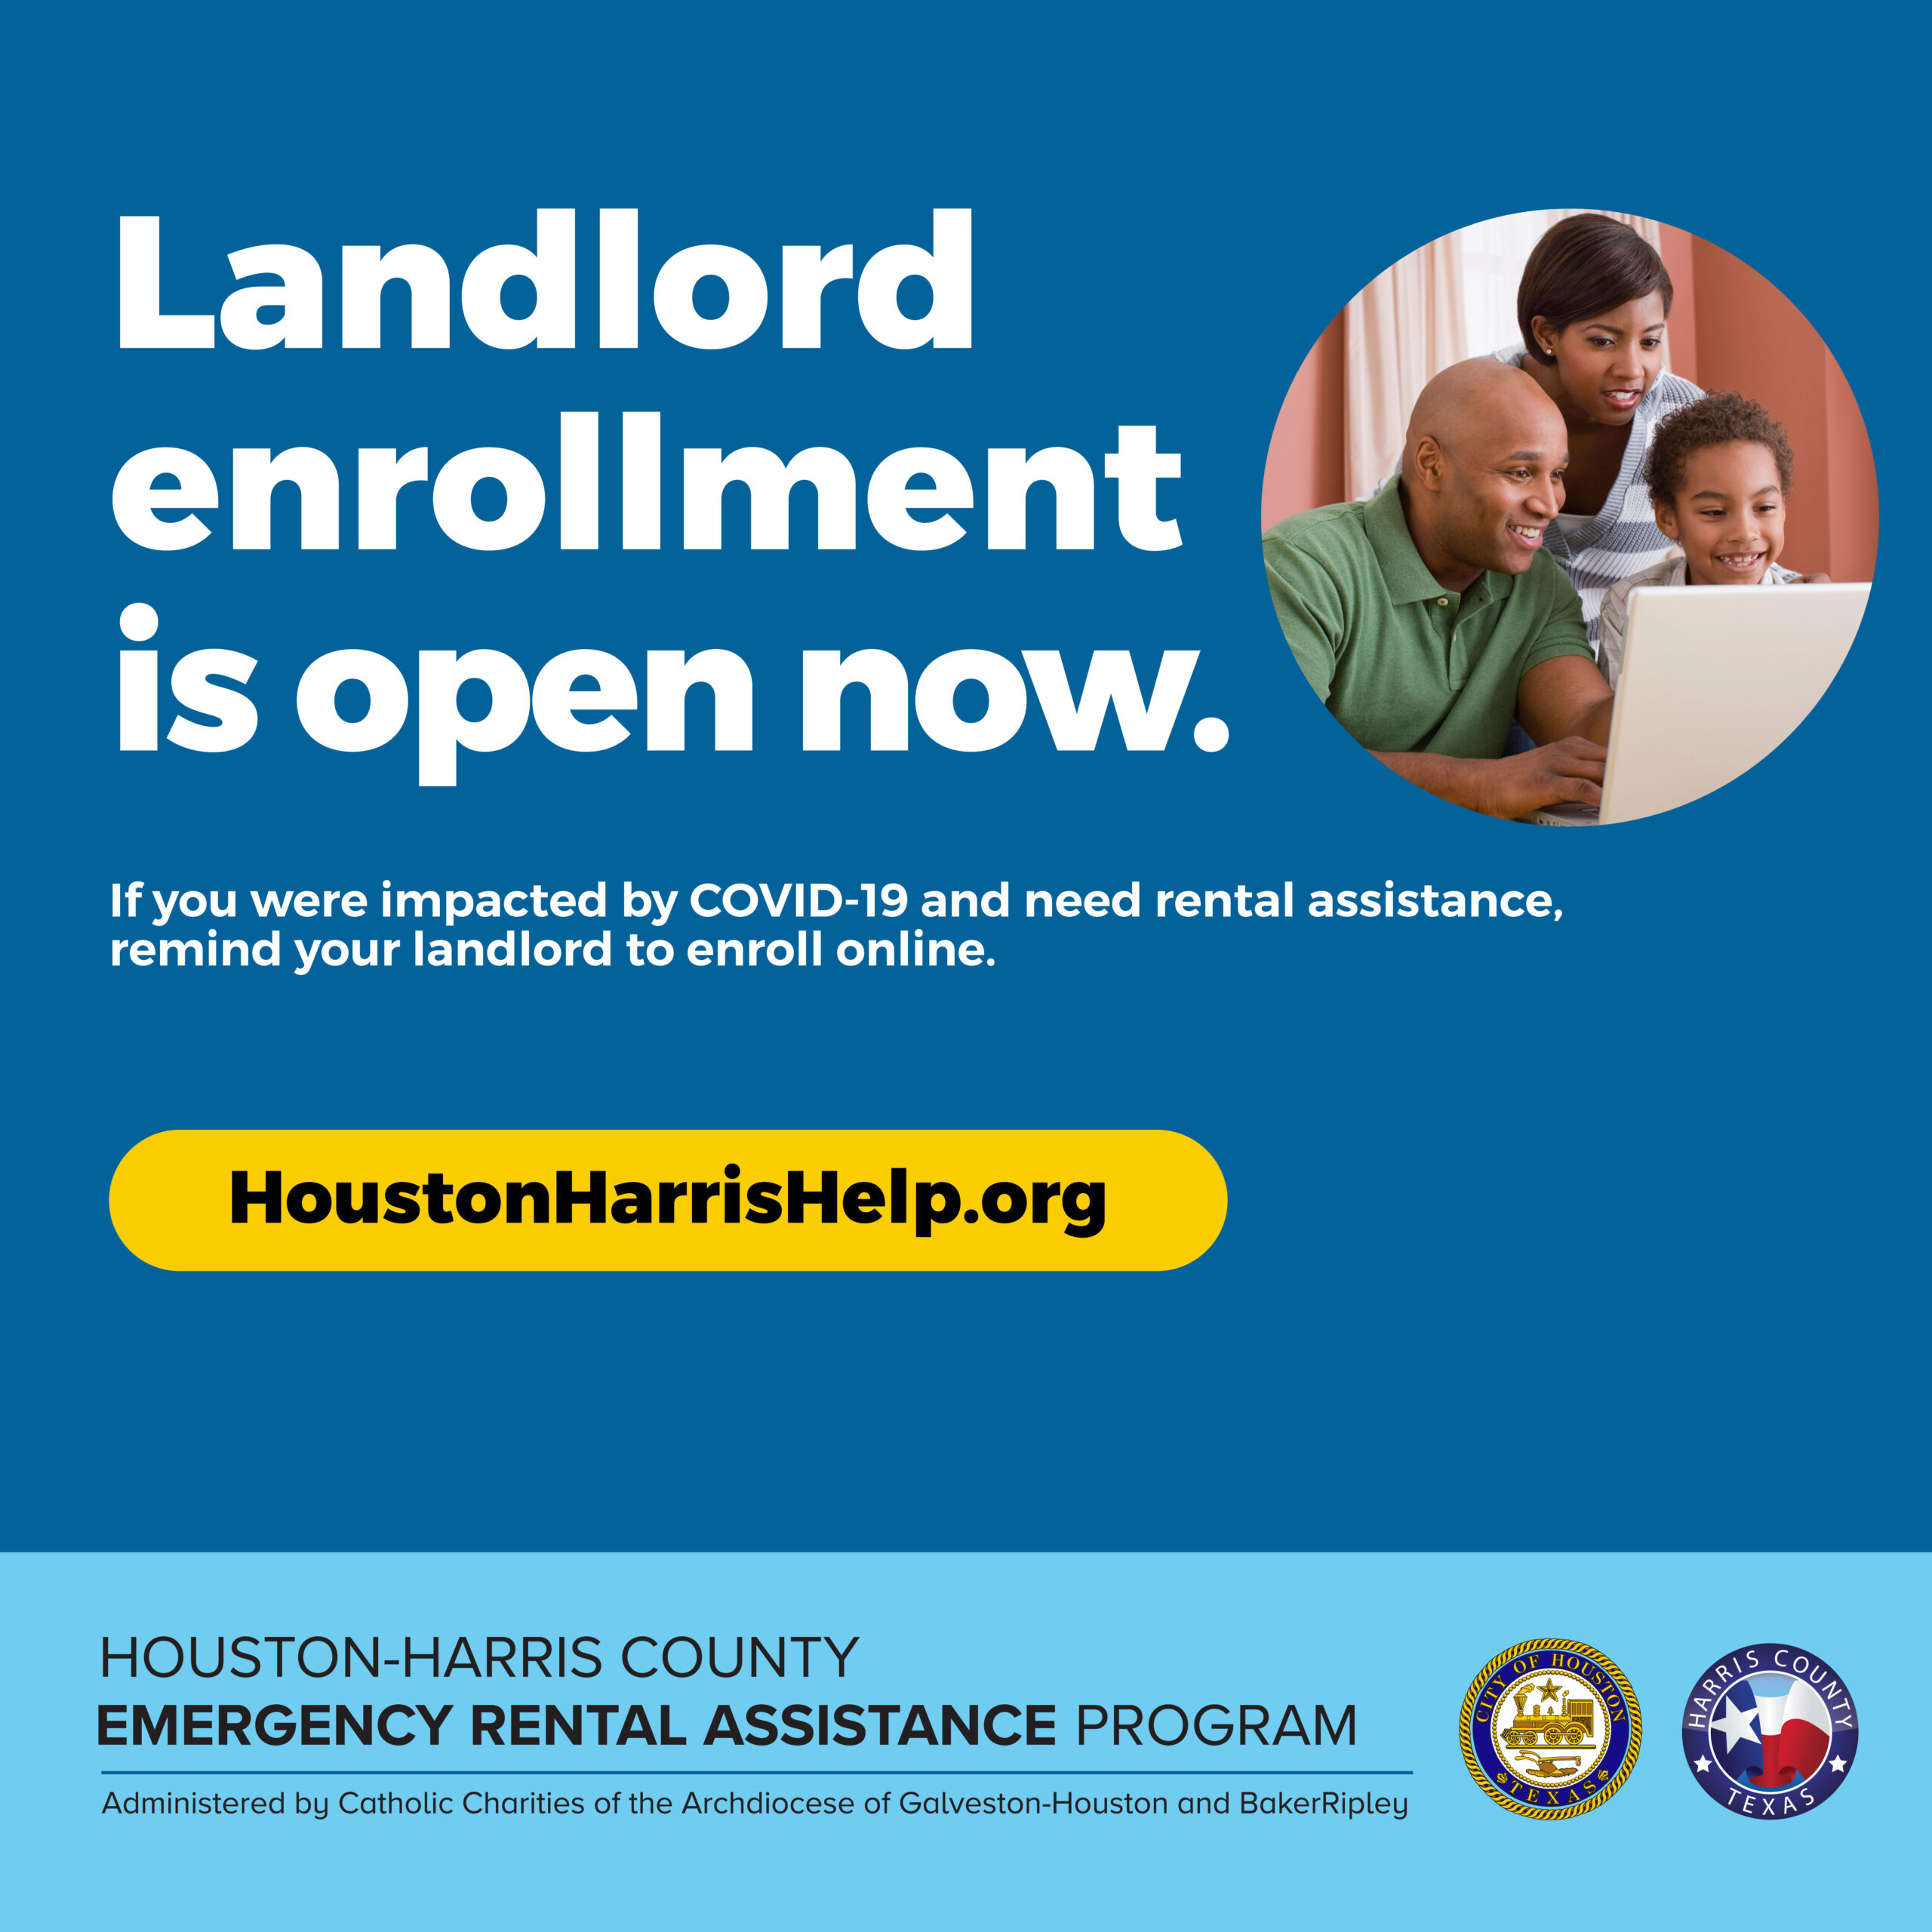 Renters should encourage their landlords to enroll now.